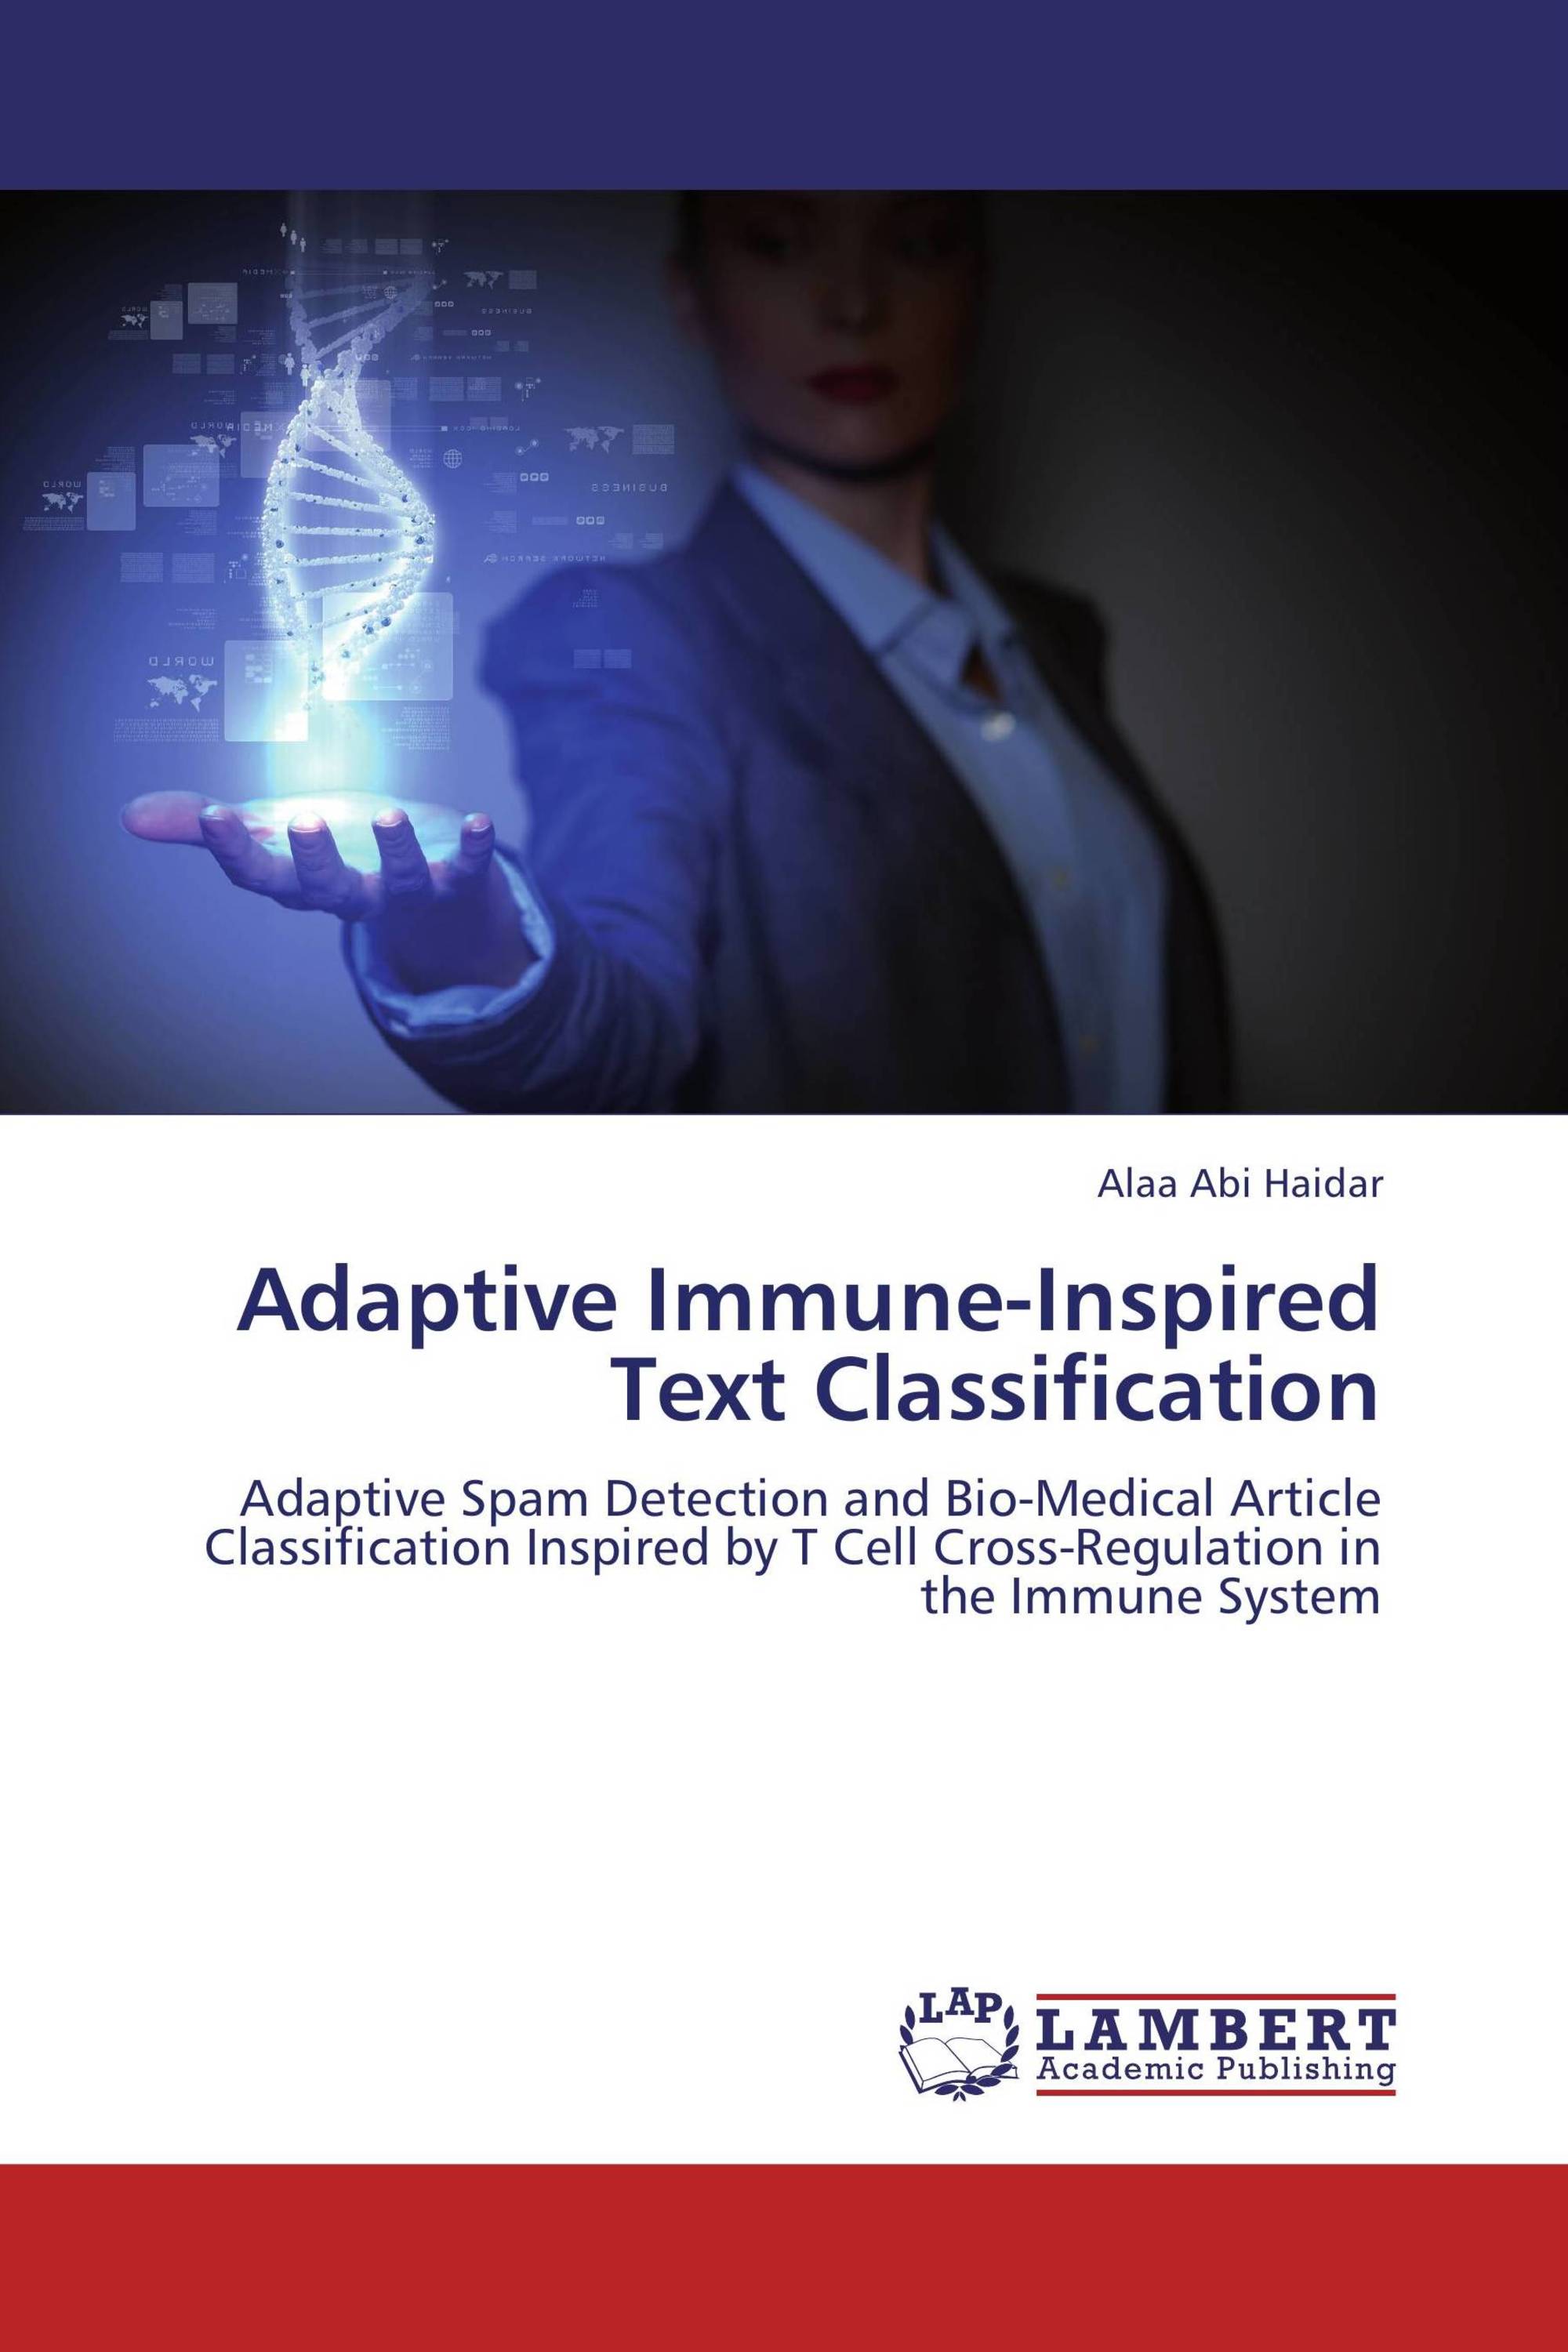 Adaptive Immune-Inspired Text Classification